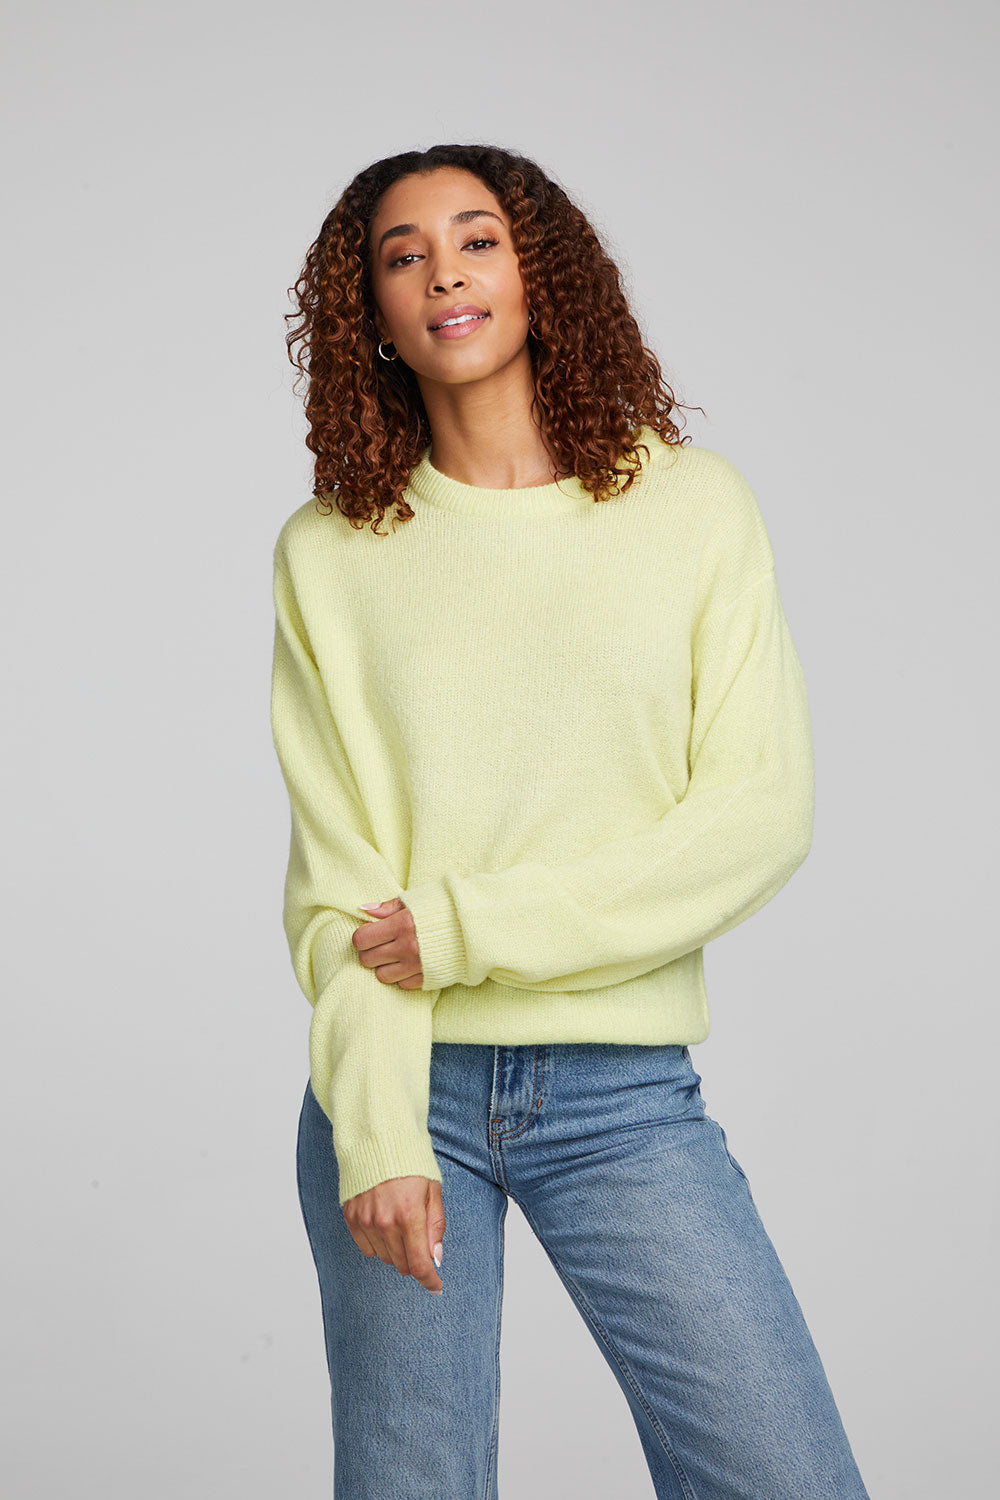 chaser-frankie-limelight-pullover-sweater-front-01